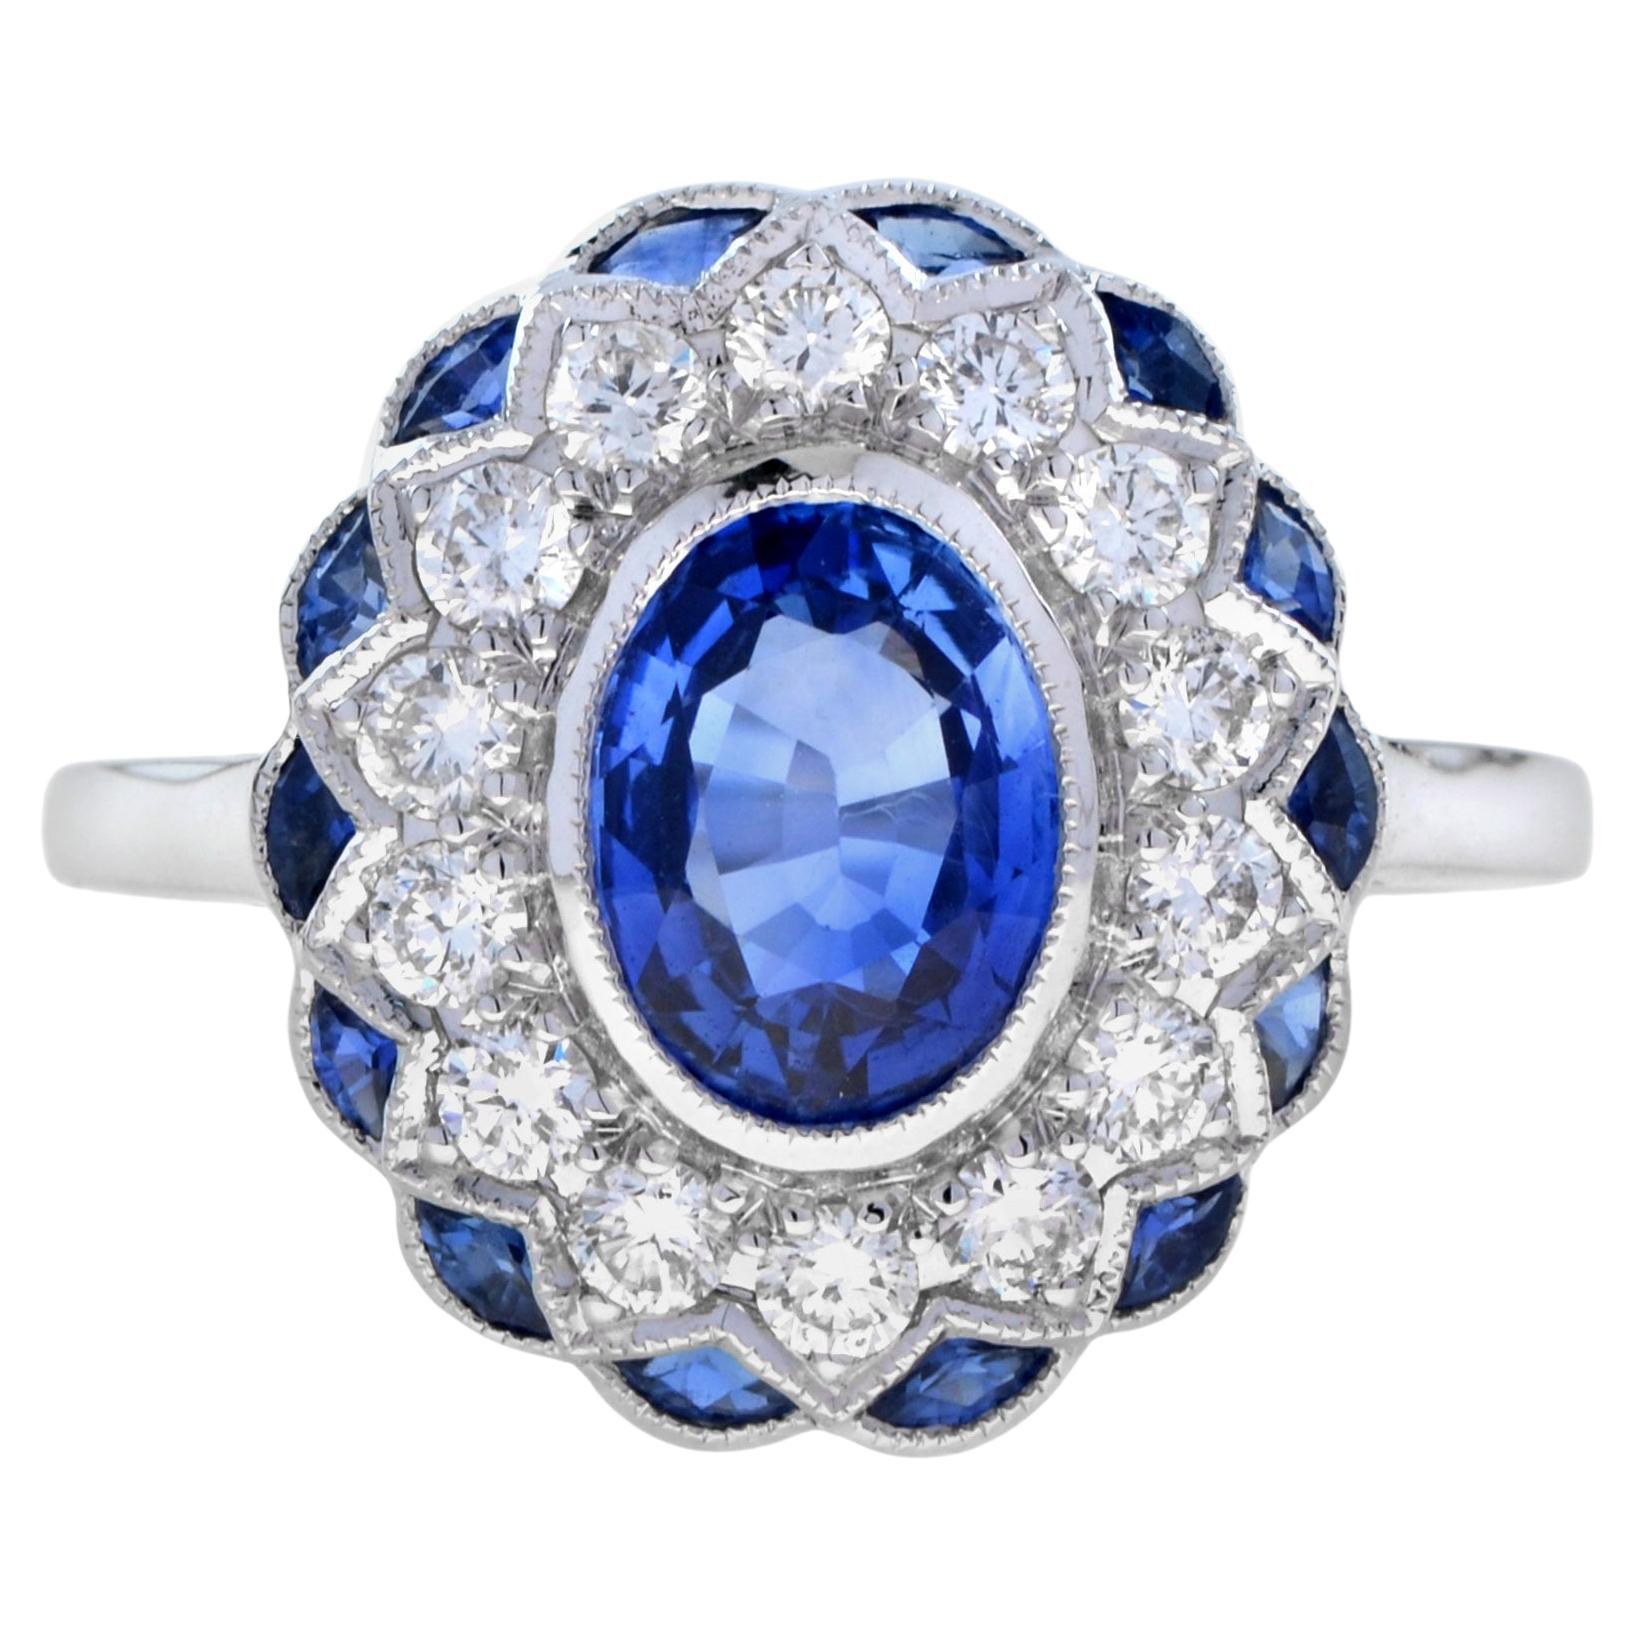 Oval Cut Ceylon Sapphire and Diamond Art Deco Style Halo Ring in 18K White Gold For Sale